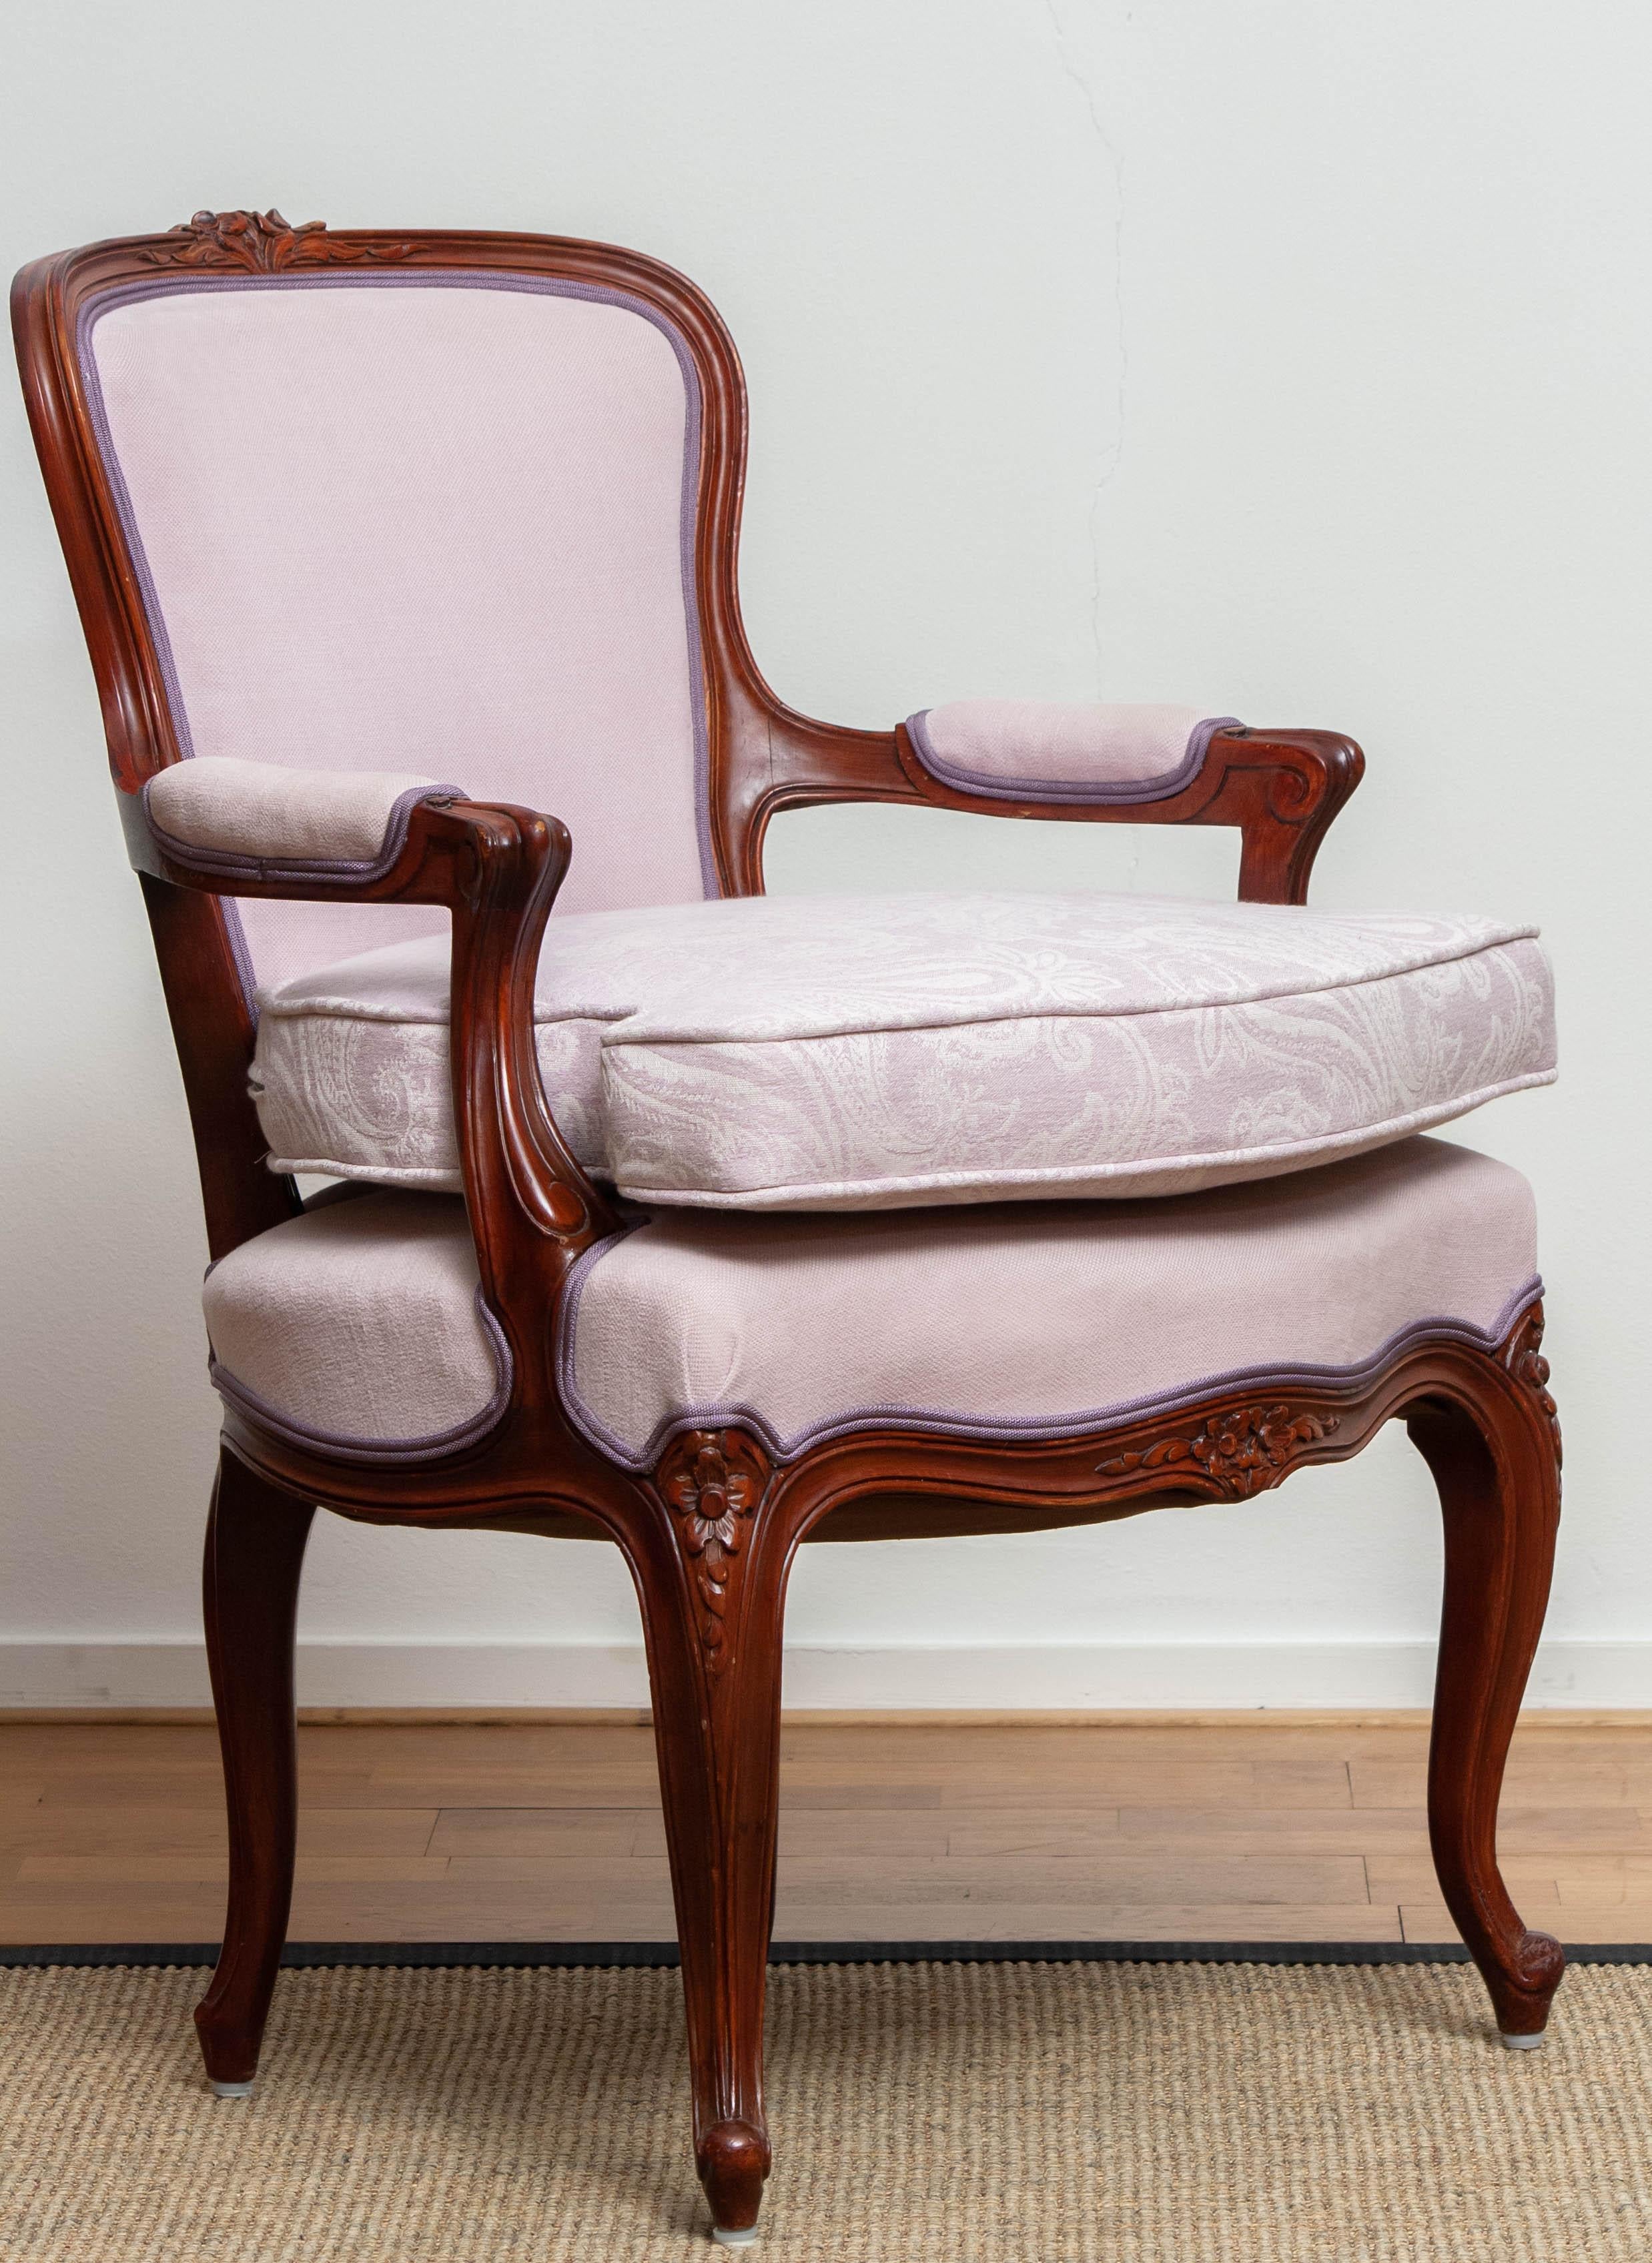 1950 Pair of Pink Swedish Rococo Bergères in the Shabby Chic Technique Chairs F 5